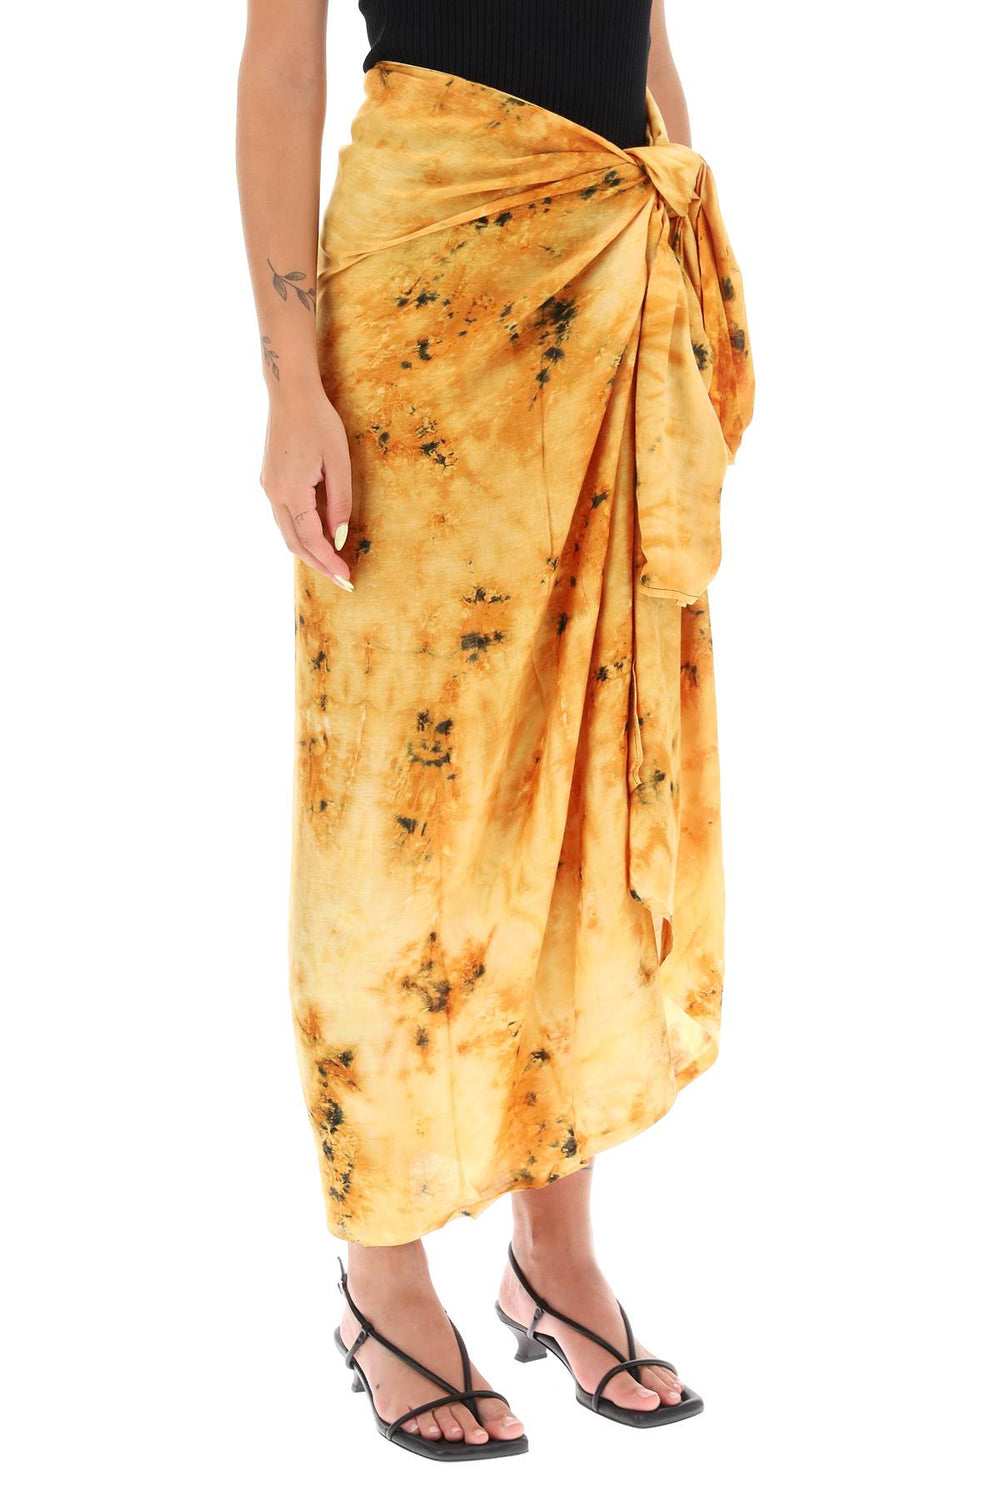 sarong in tie-dye cotton-1